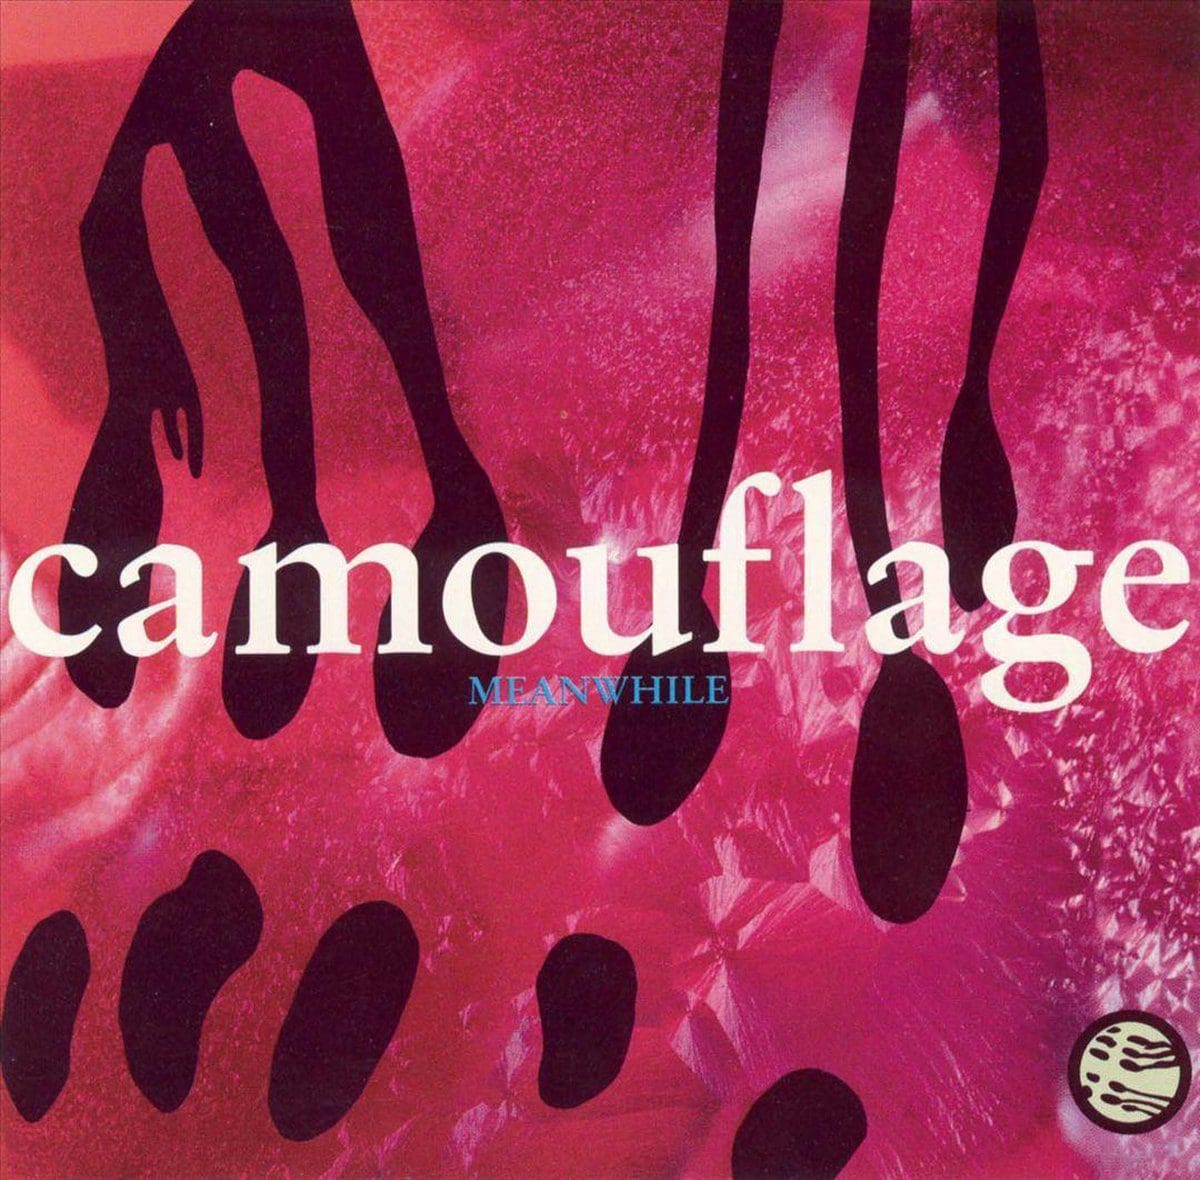 Limited 30th anniversary edition for Camouflage's 'Meanwhile' album on 2CD